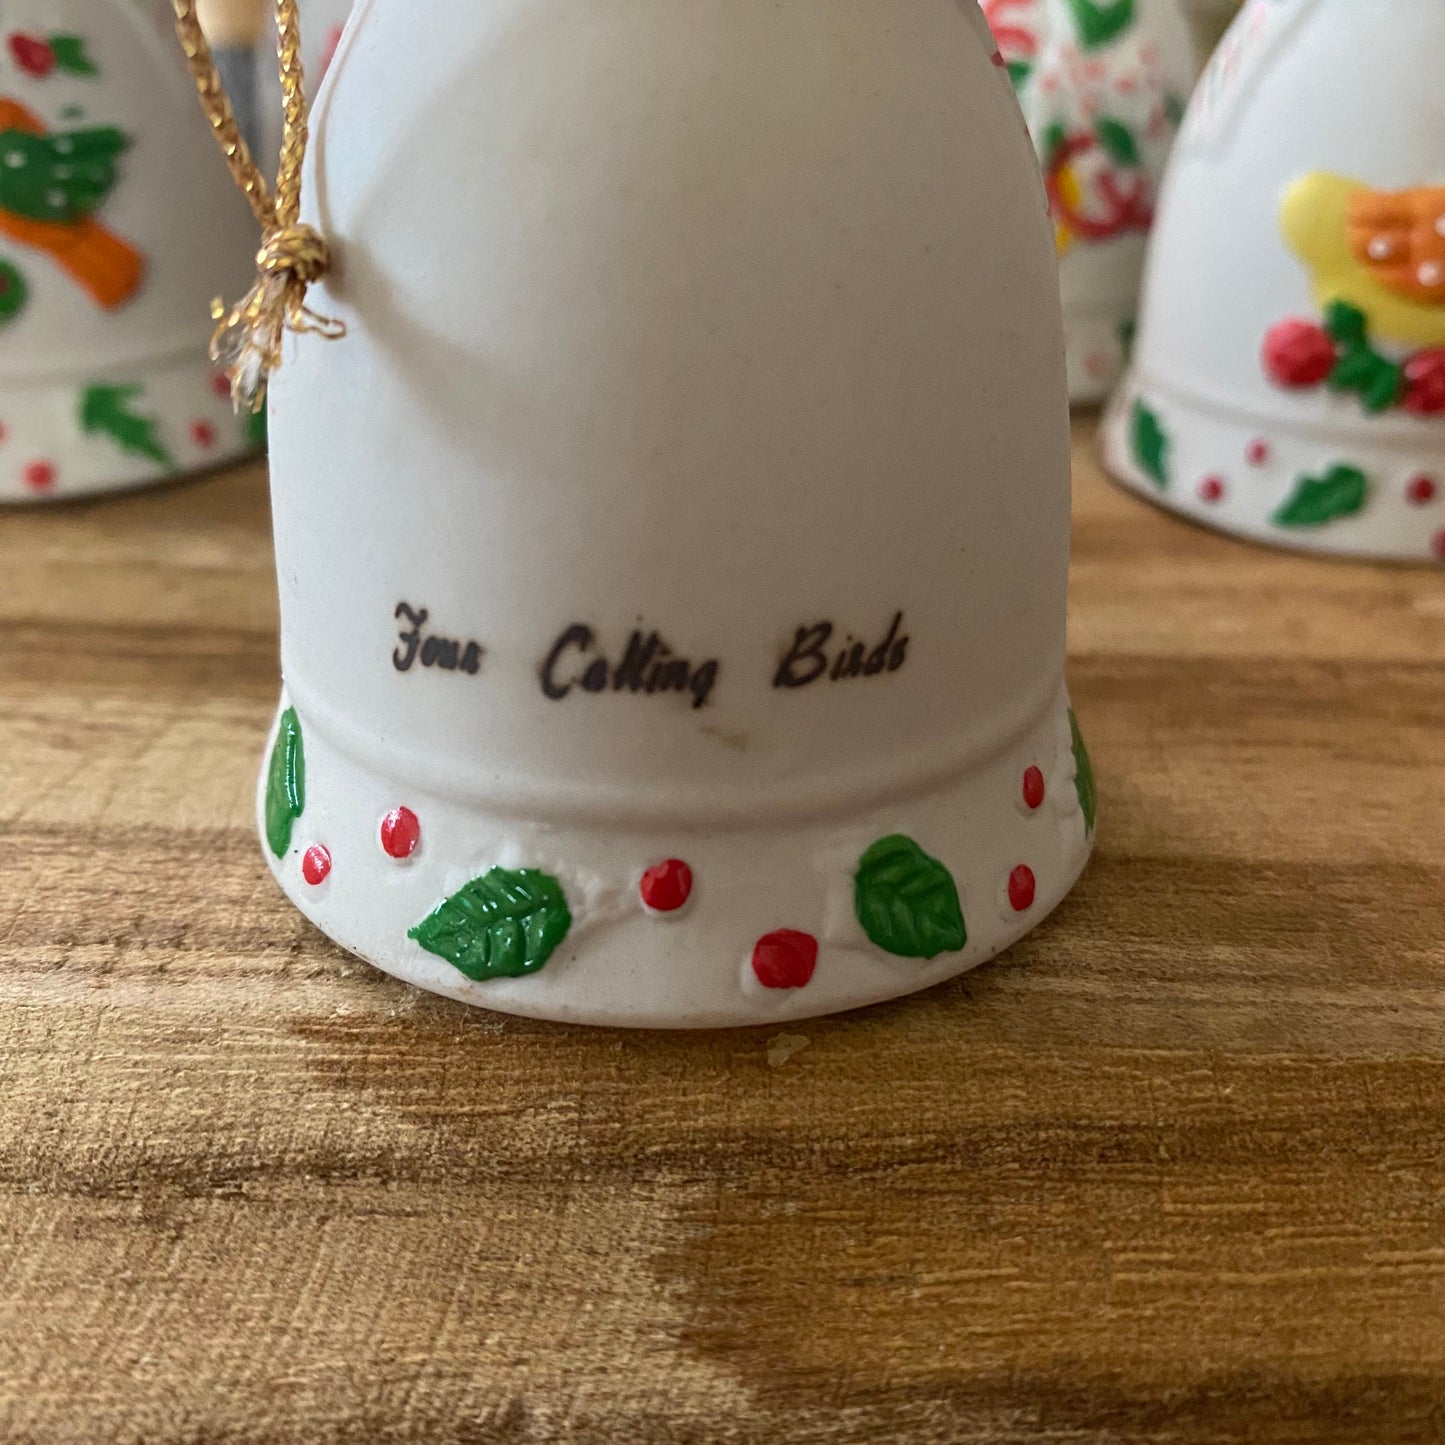 12 days of Christmas ornament bells